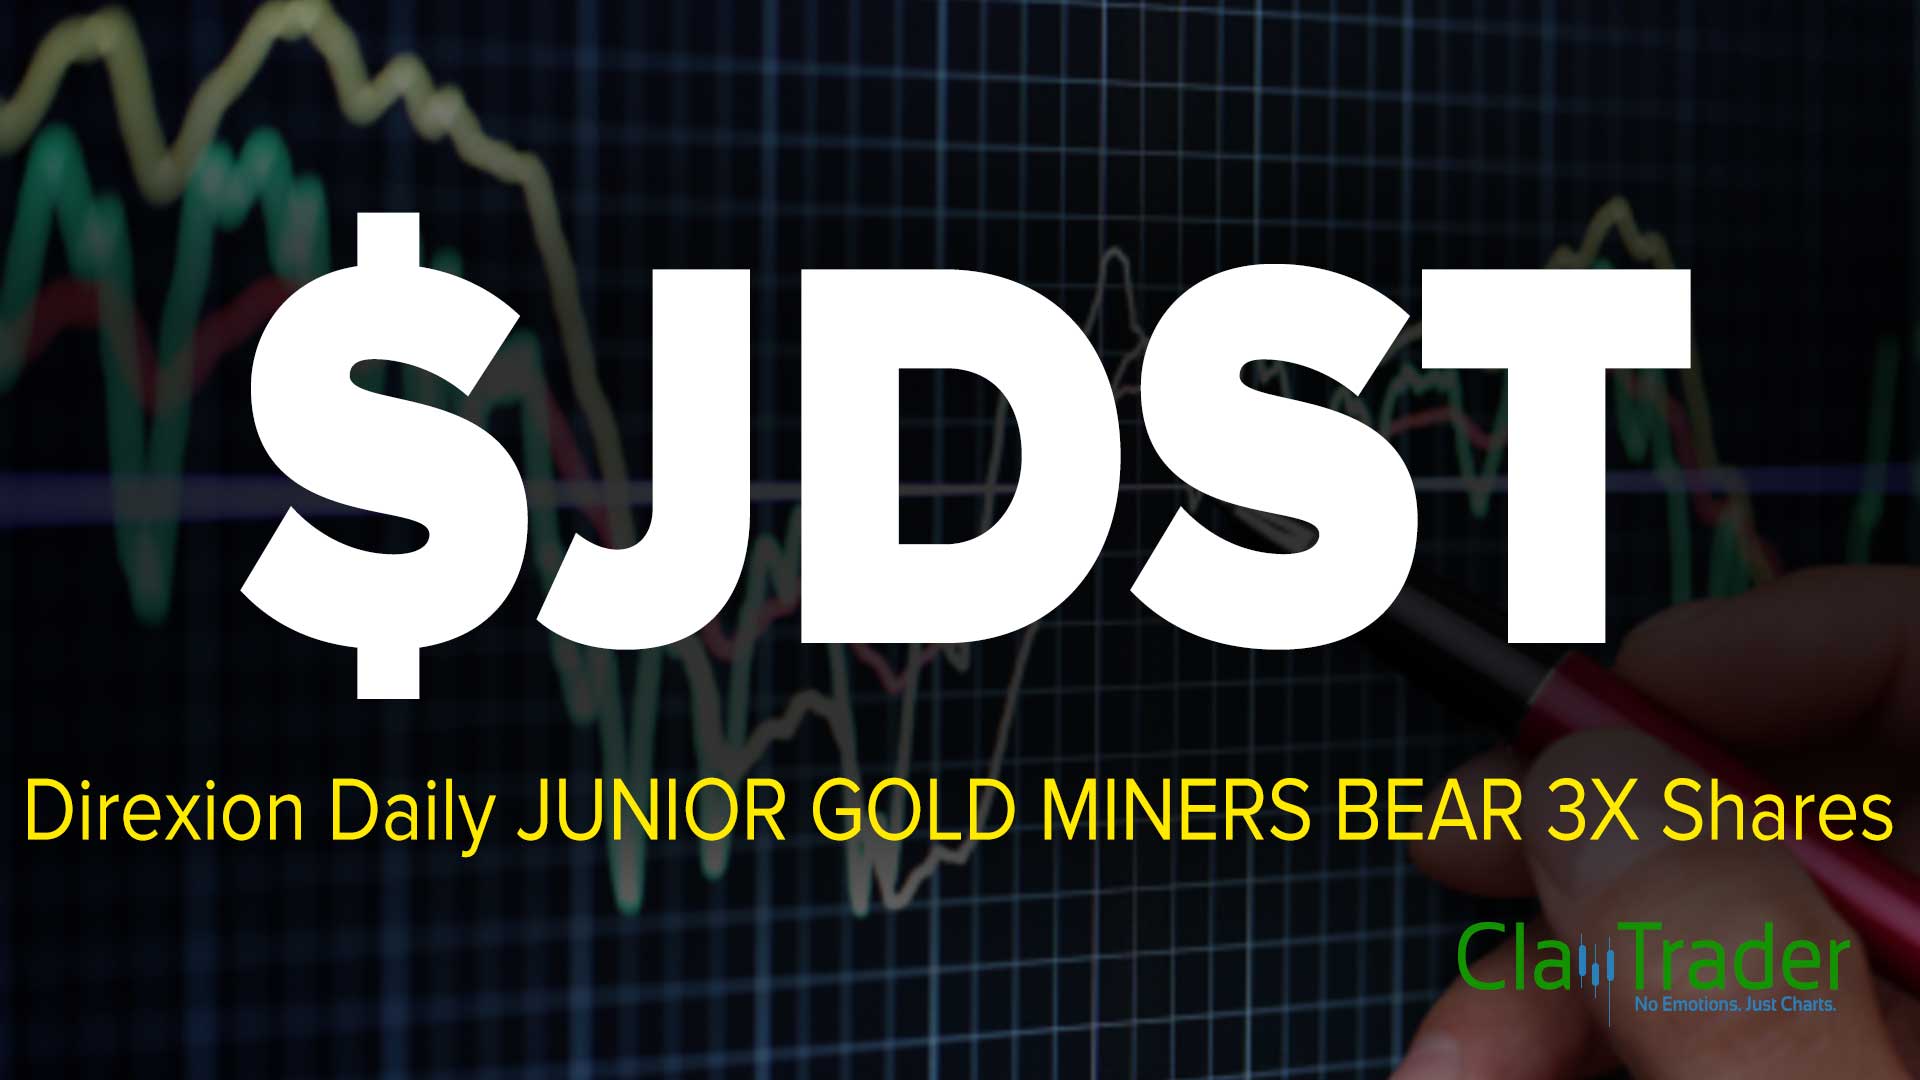 Direxion Daily JUNIOR GOLD MINERS BEAR 3X Shares ($JDST) Stock Chart Technical Analysis